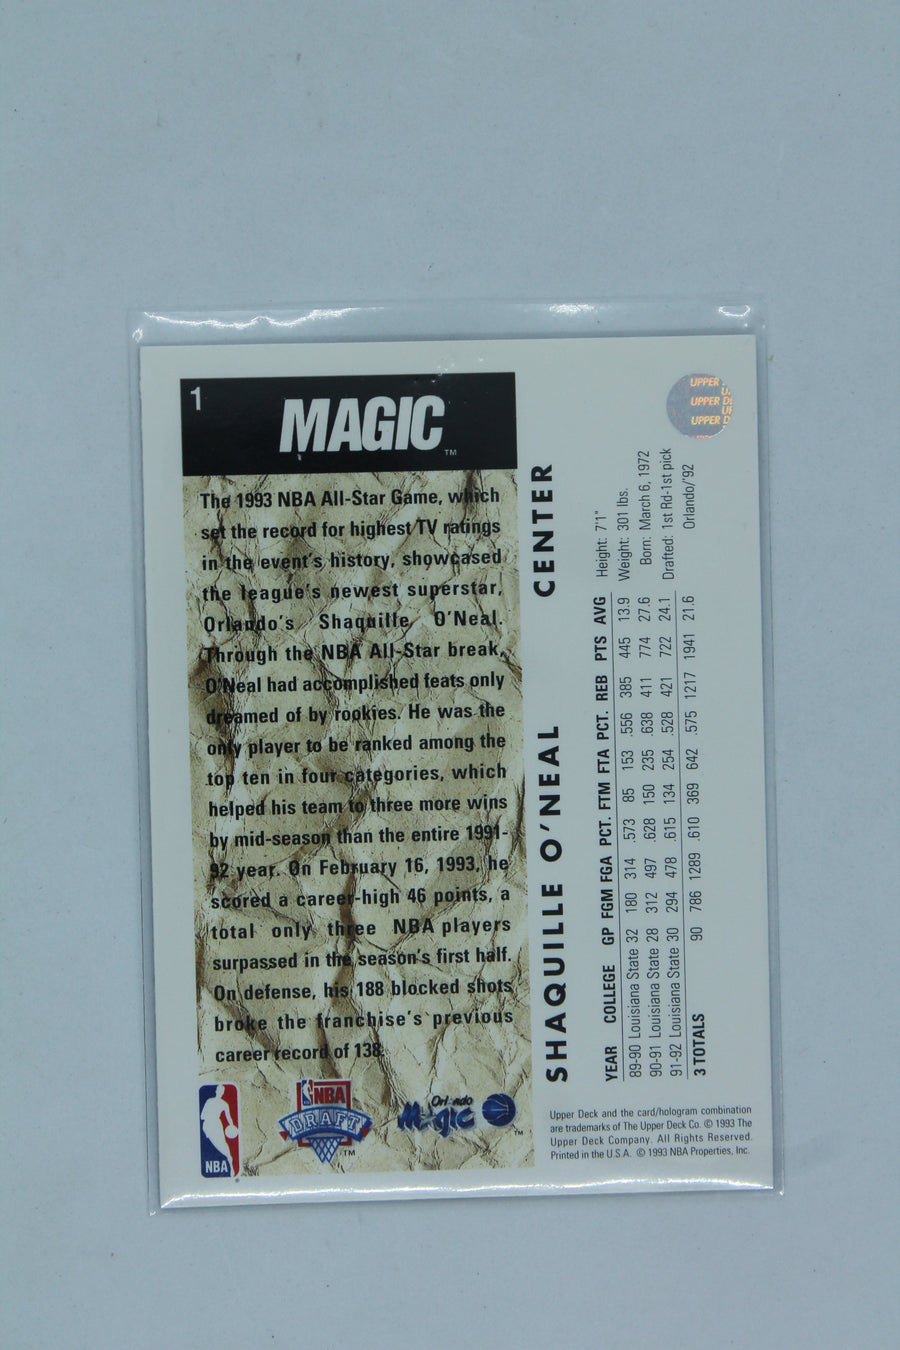 Shaquille O'Neal Upper Deck Trade Card Rookie Card